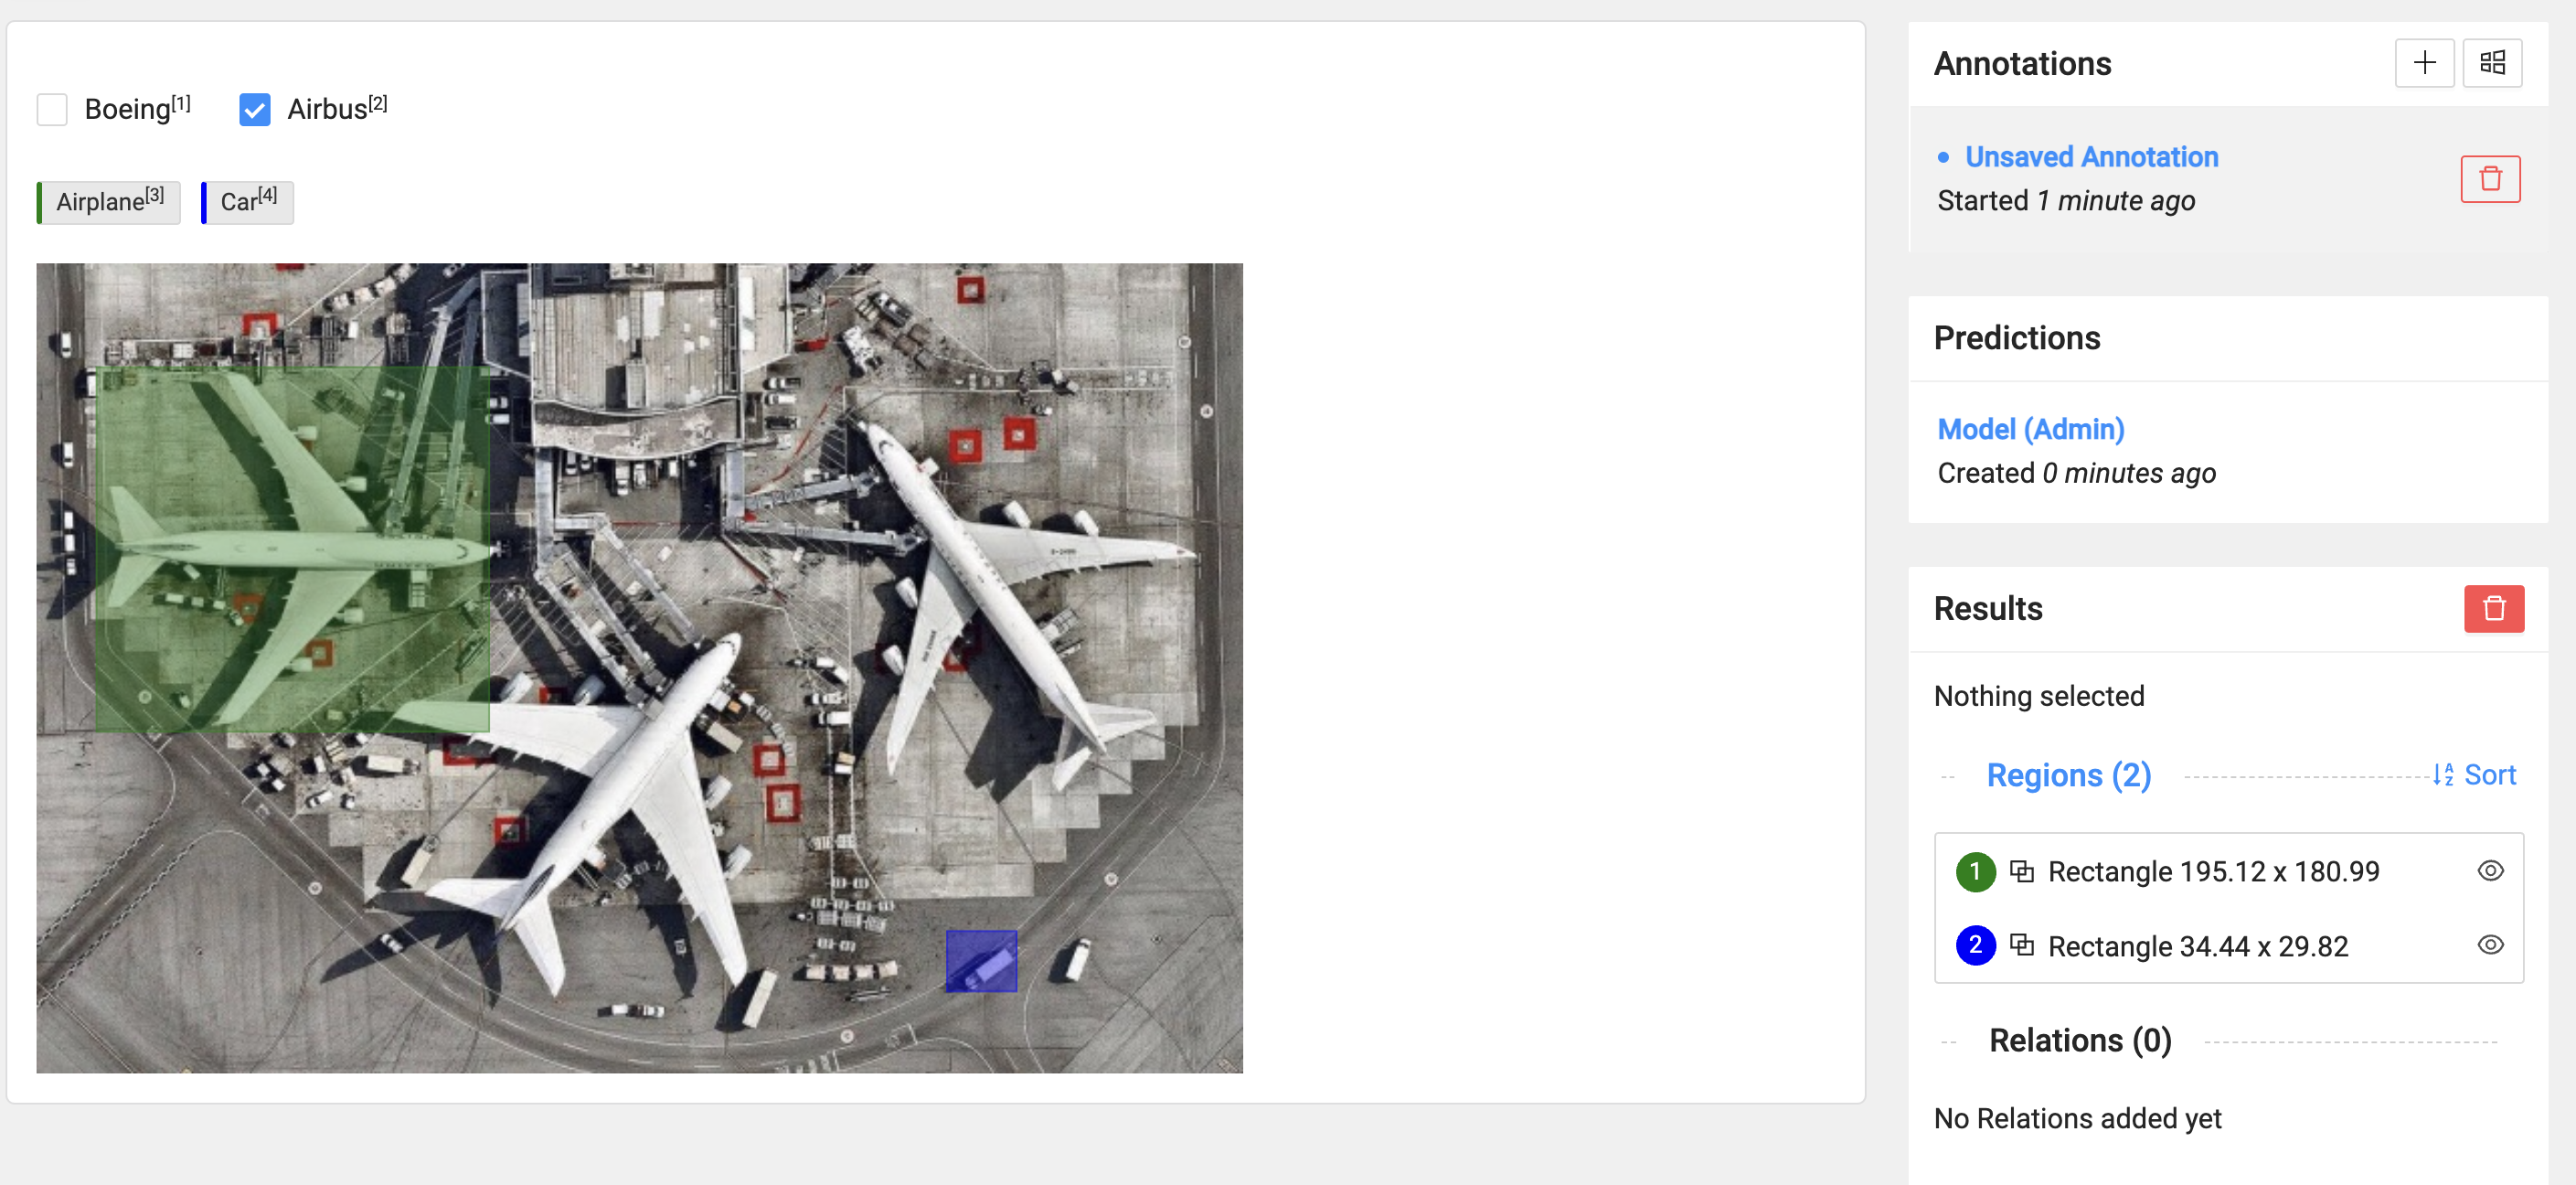 screenshot of the Label Studio UI showing an image of airplanes with bounding boxes covering each airplane.